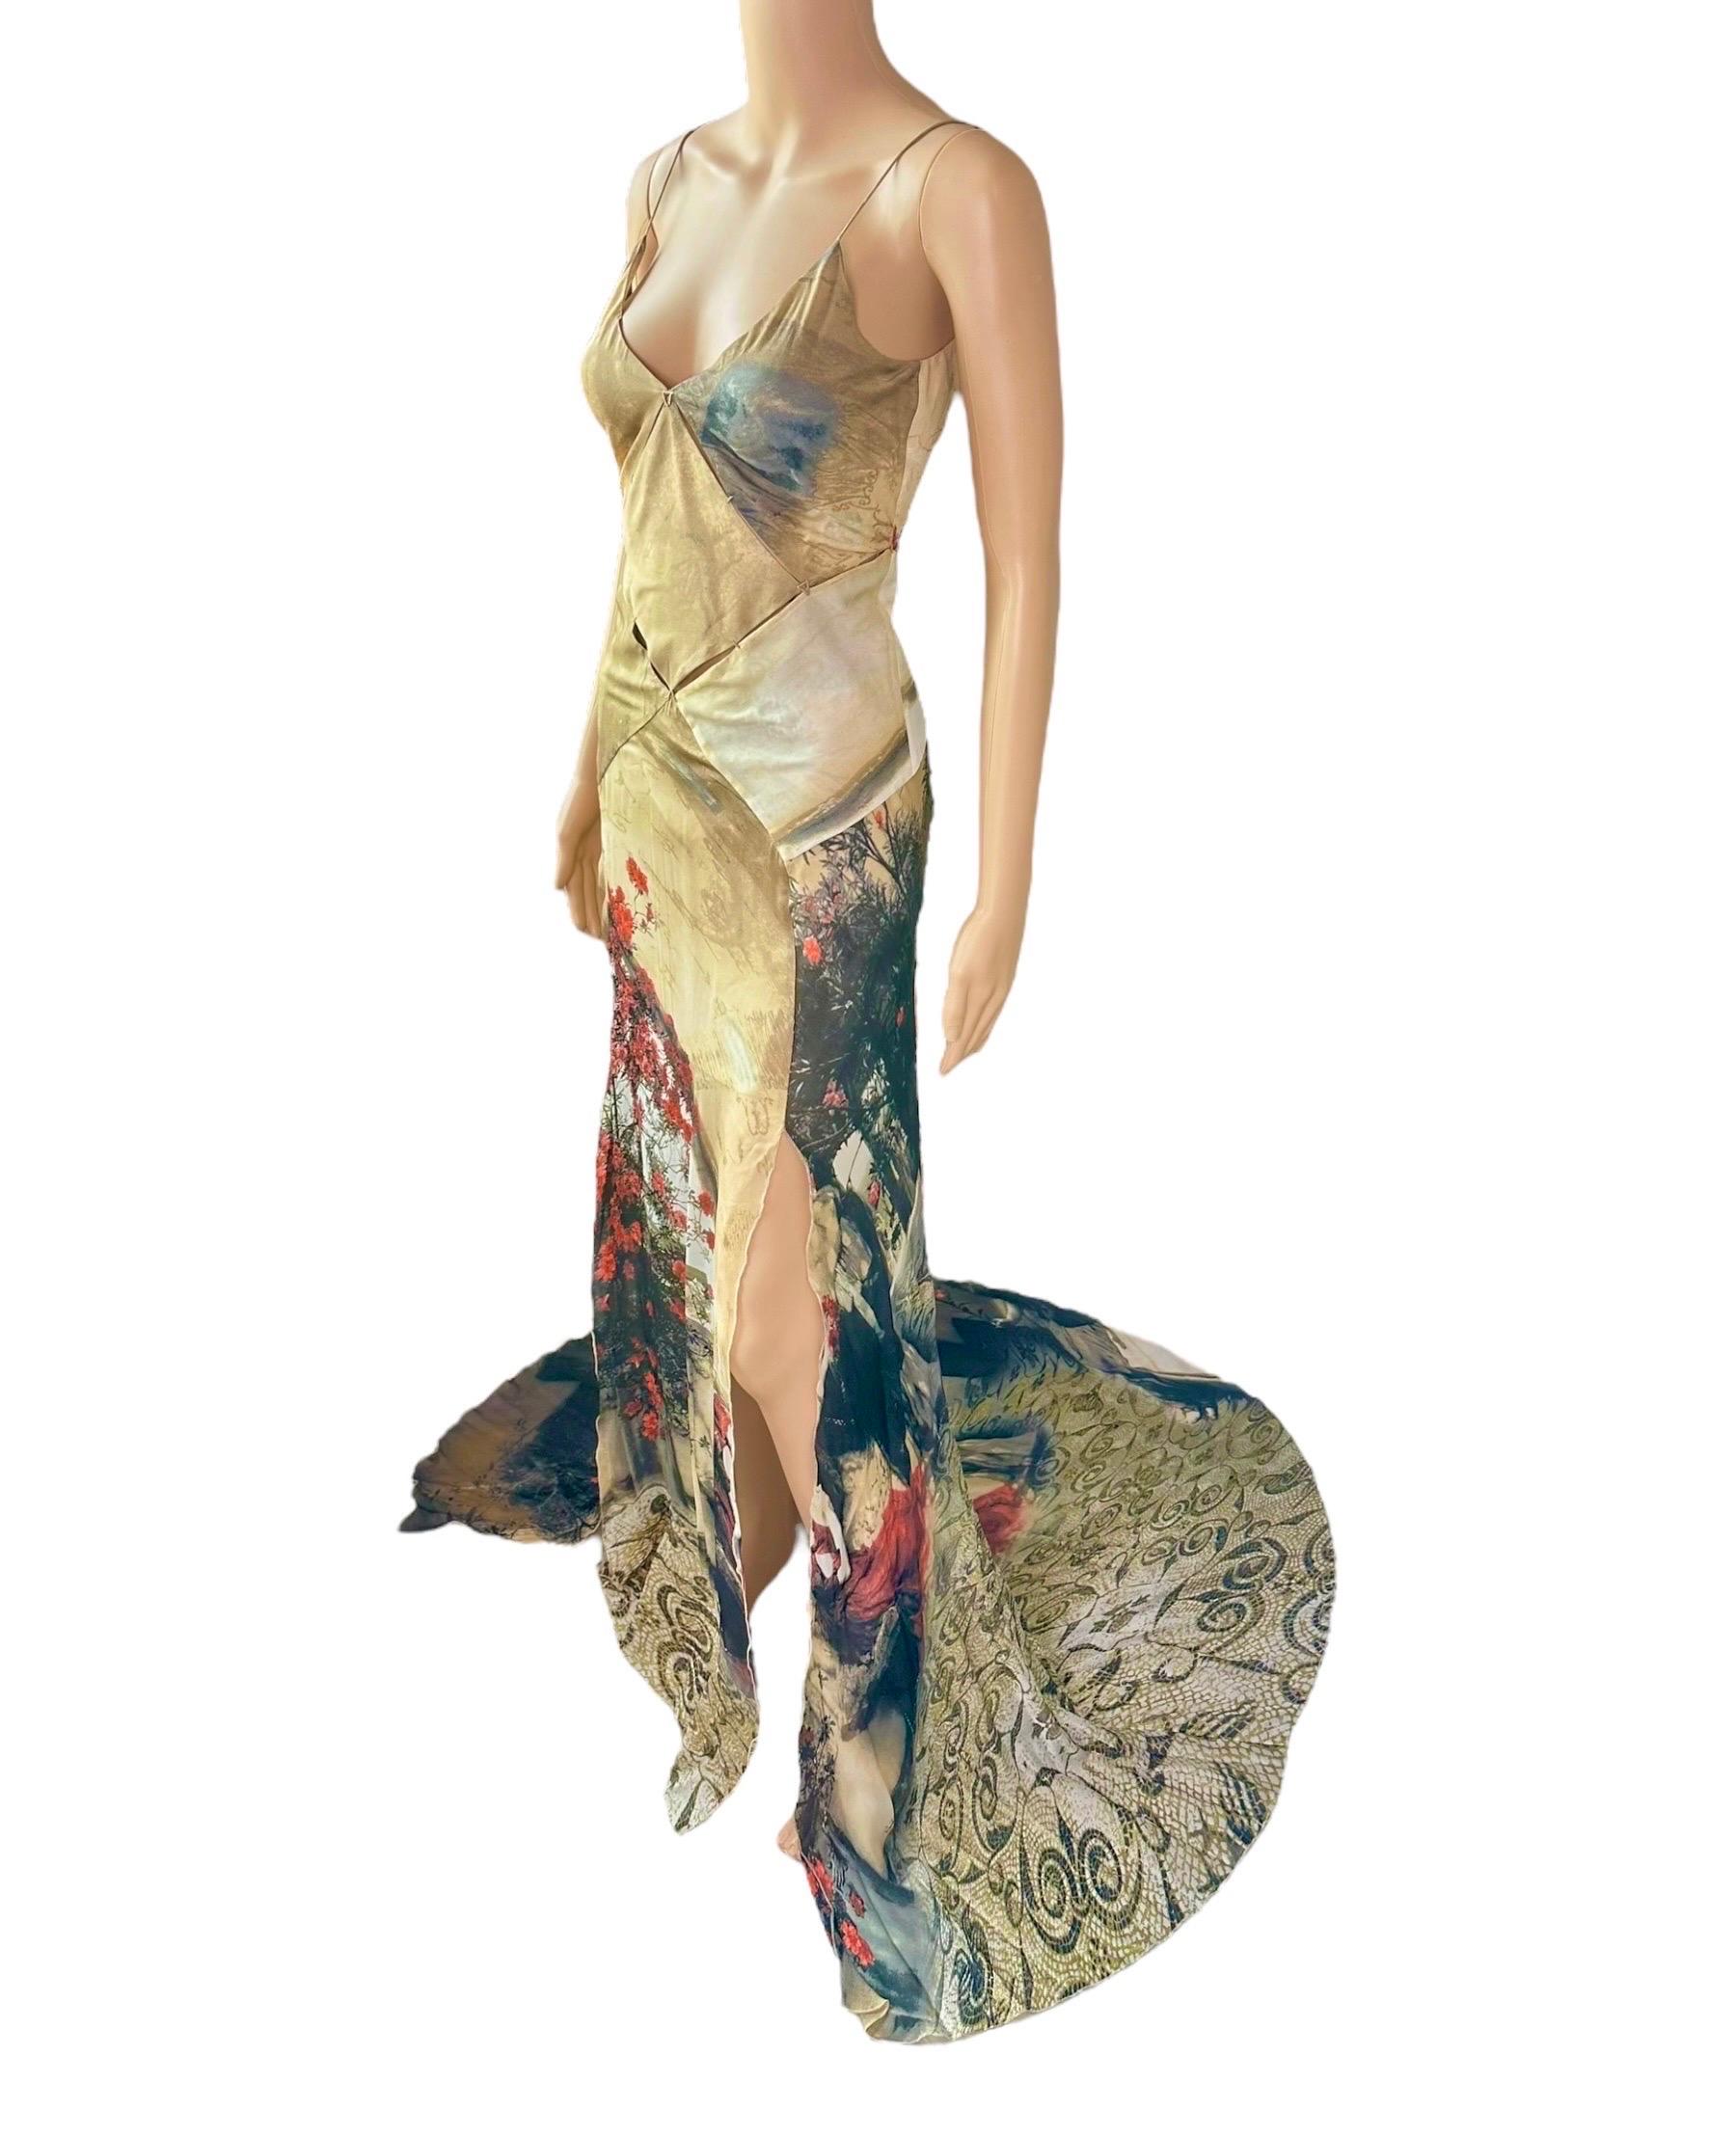 Roberto Cavalli S/S 2004 Runway Plunged Décolleté Cutout High Slit Silk Train Slip Evening Dress Gown Size XS

Look 27 from the Spring 2004 Collection.
